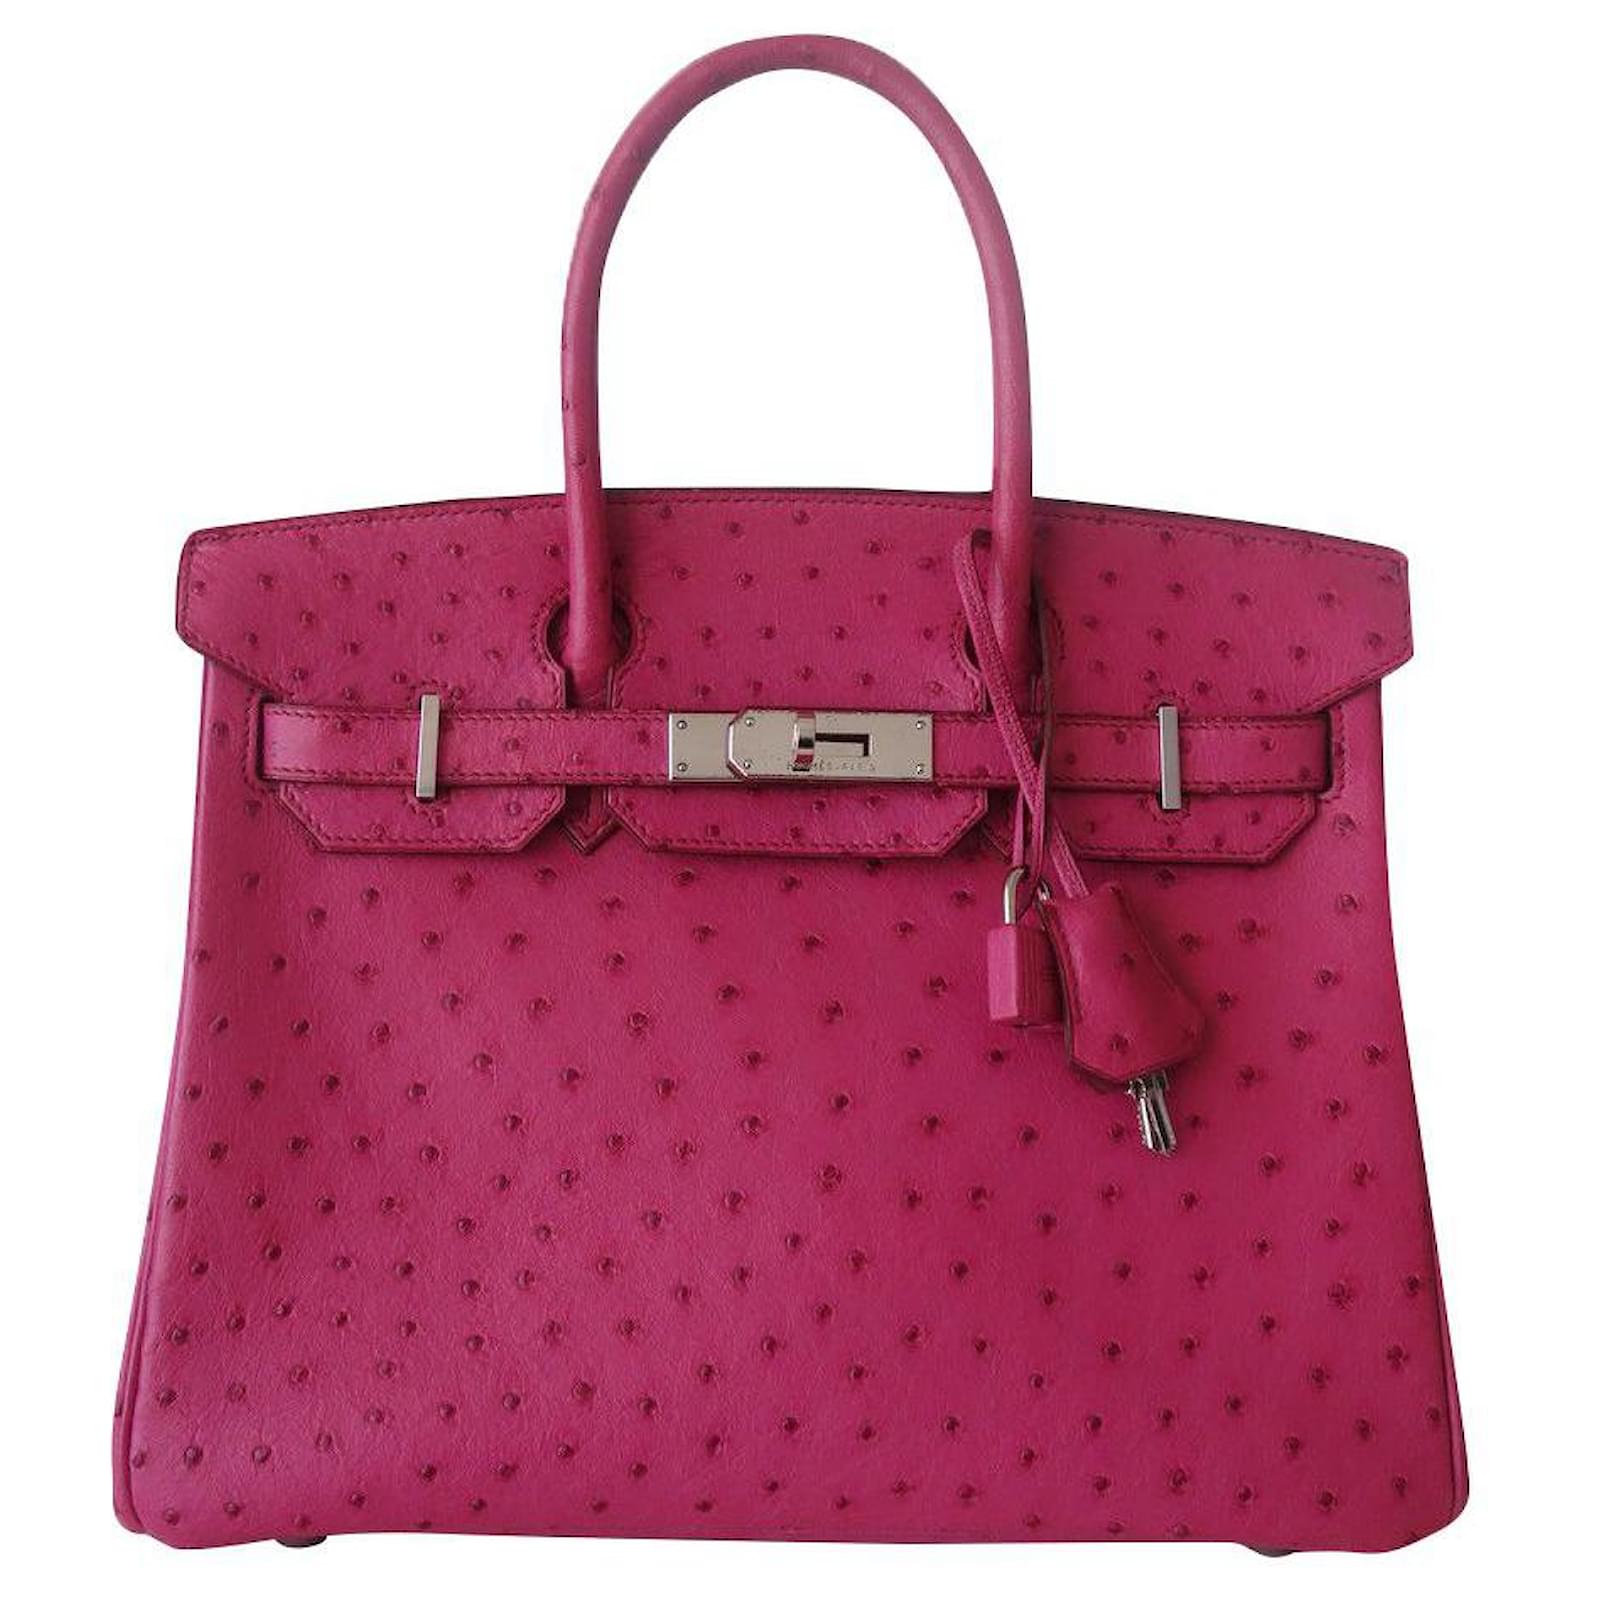 Hermes style kelly bags pink ostrich handbags